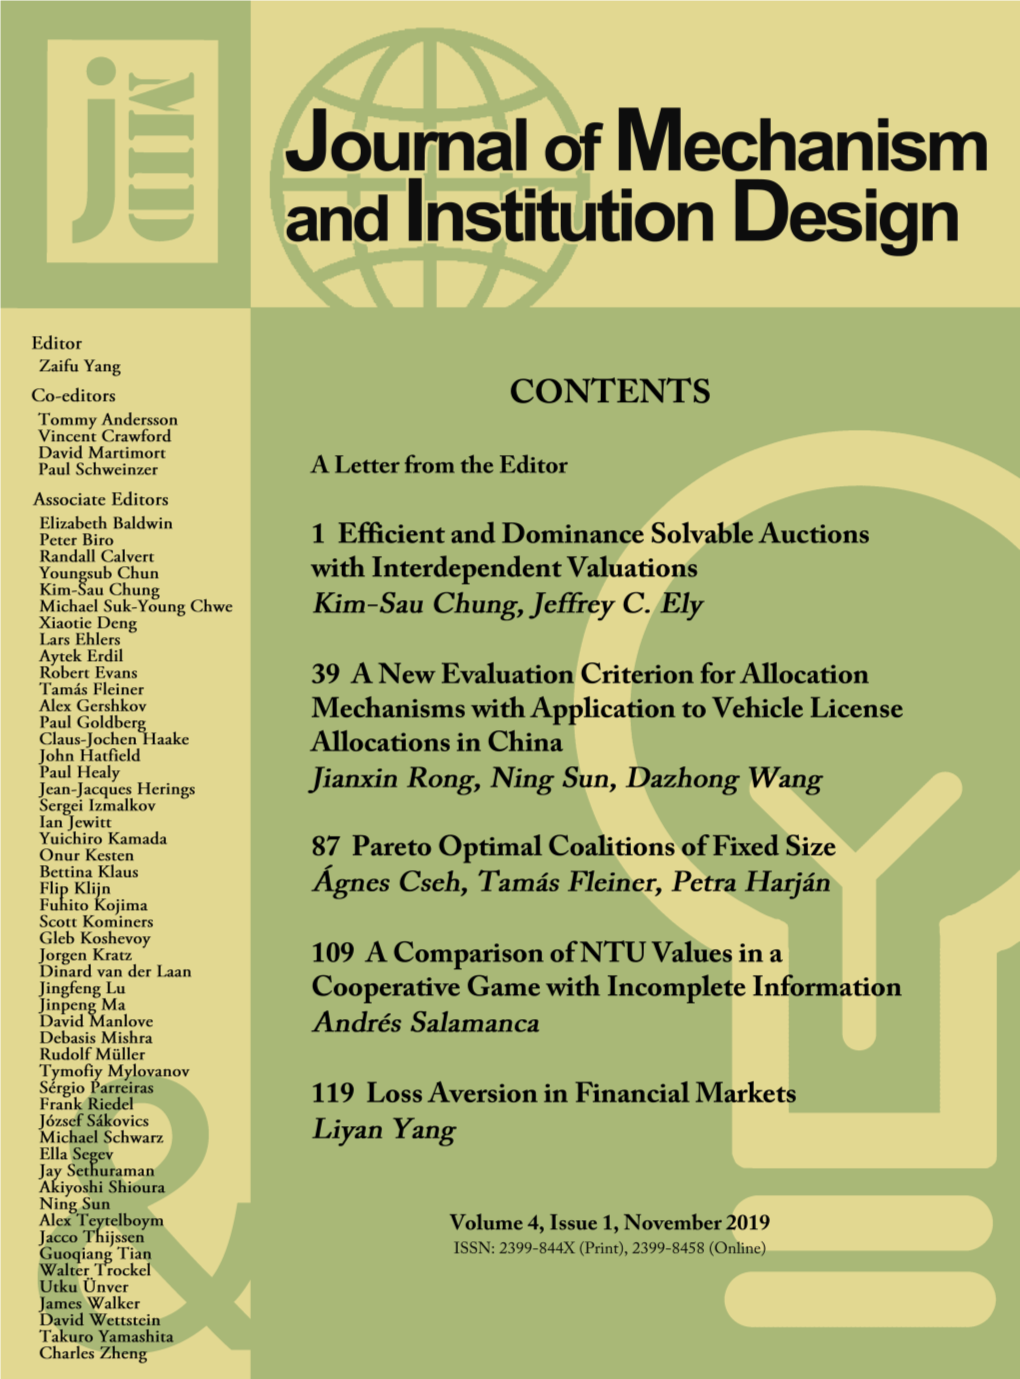 Journal of Mechanism and Institution Design Volume 4, Issue 1